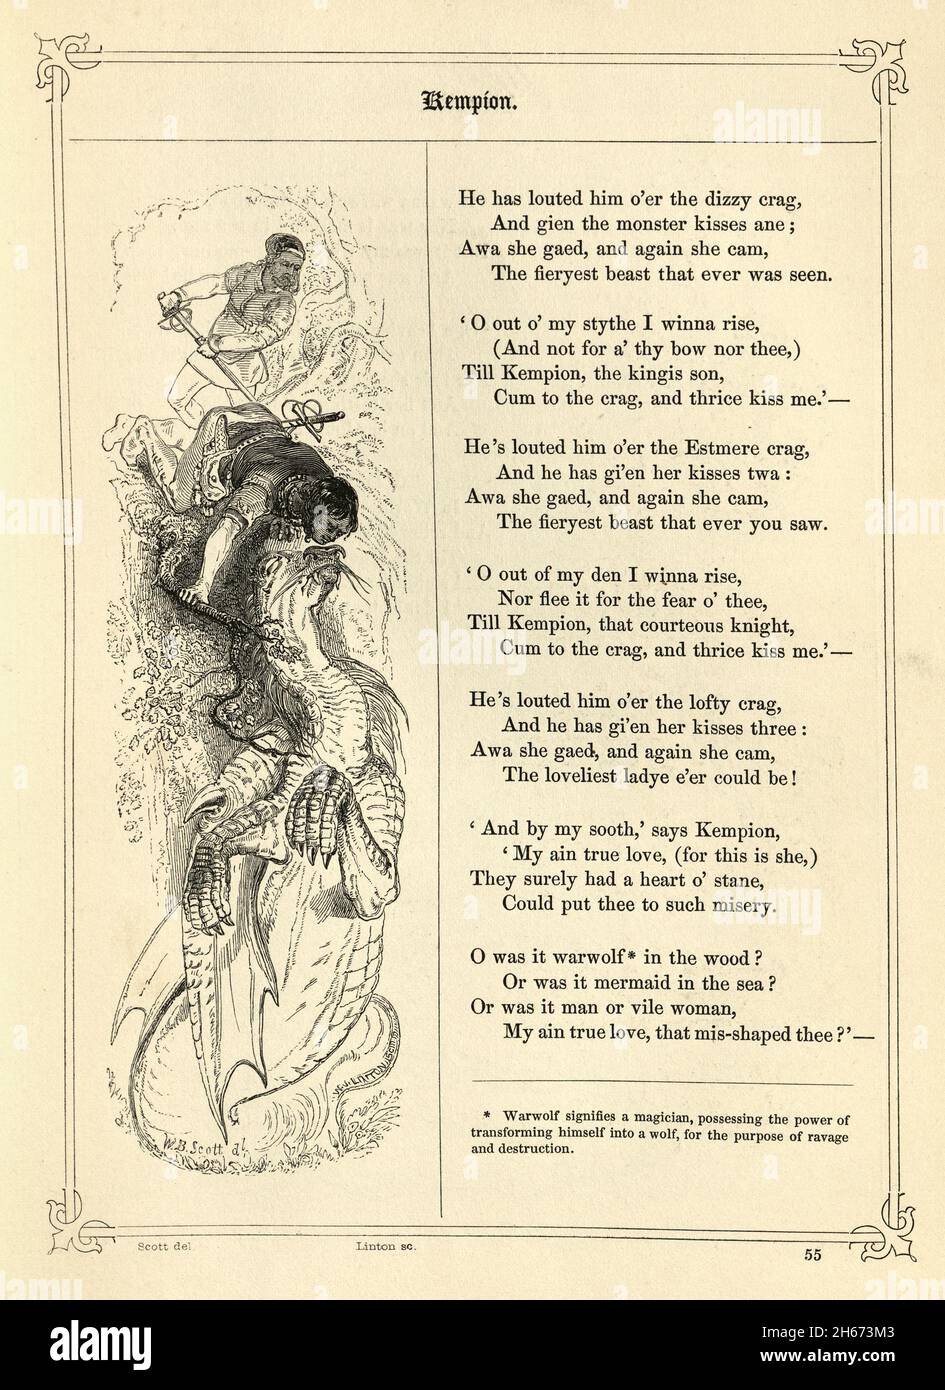 Book of British Ballads, Kemp Owyne or Kempion, The heroine is turned into a worm (dragon), usually by her stepmother, who curses her to remain so unt Stock Photo